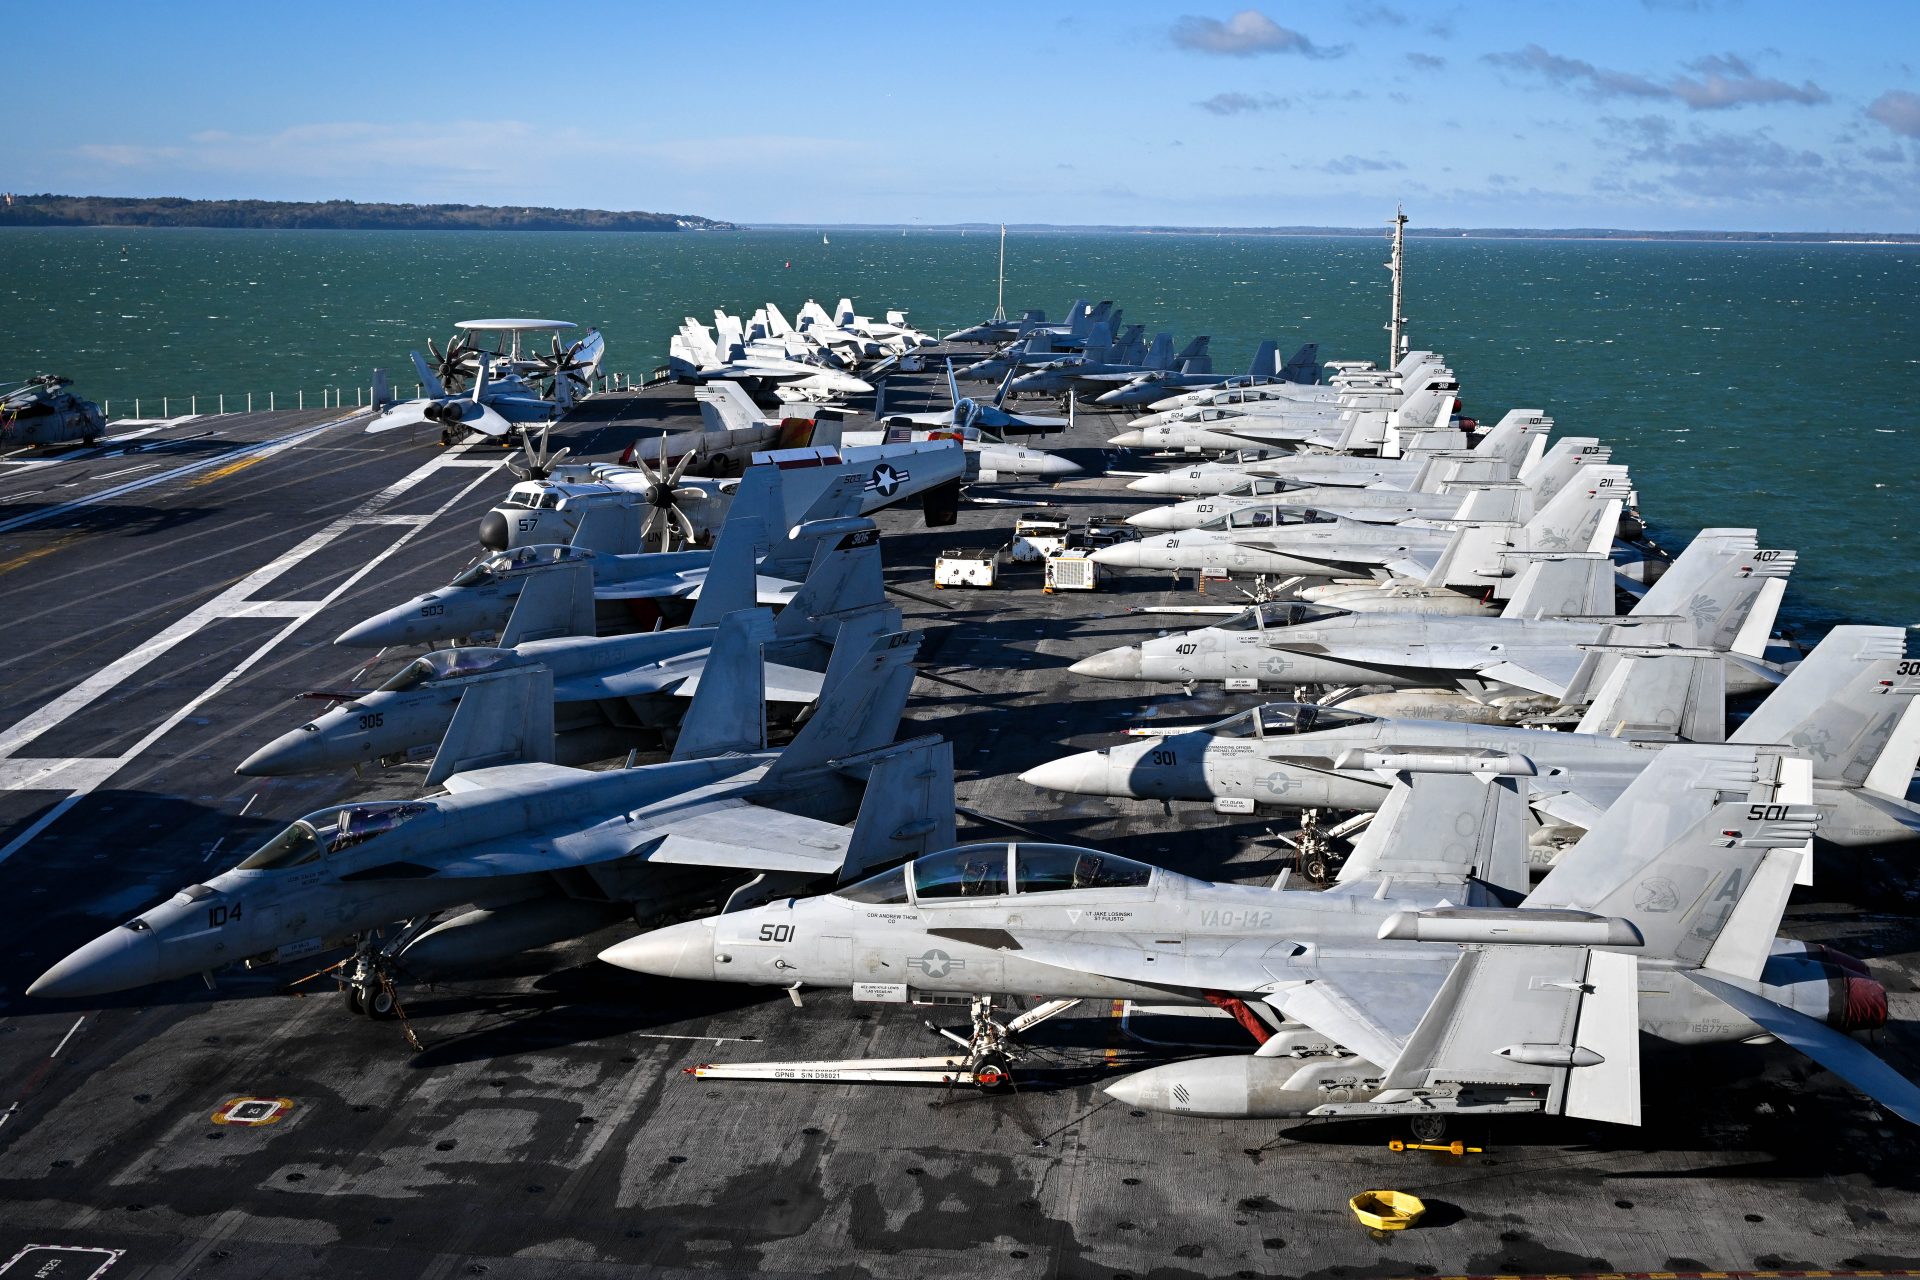 Moving the strike group 